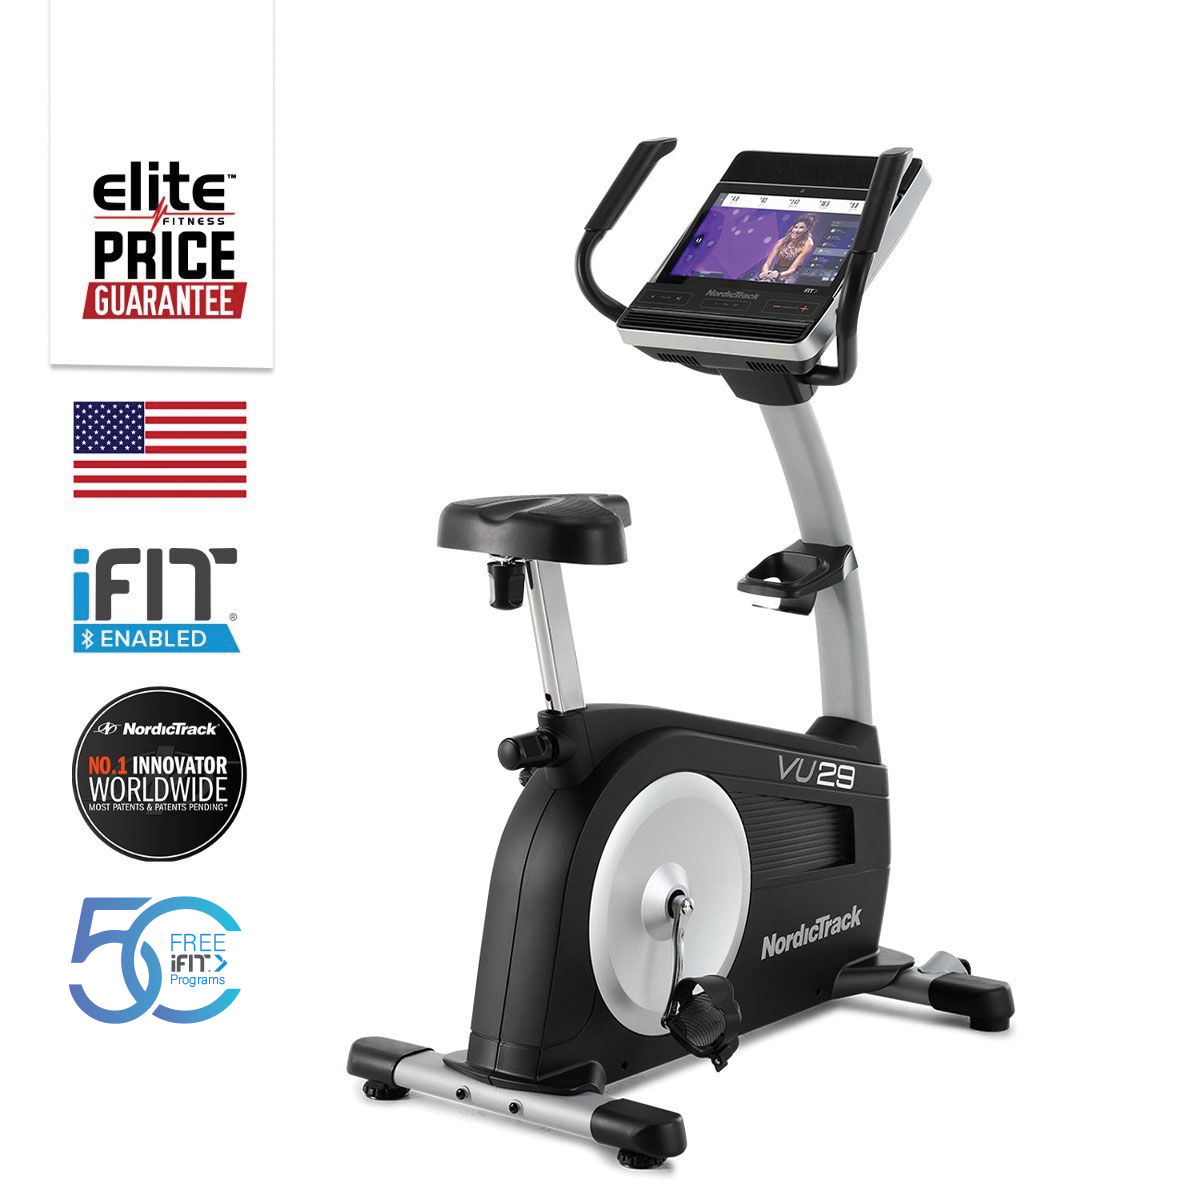 VU29 EXERCYCLE  - AVAILABLE IN ST JOHNS